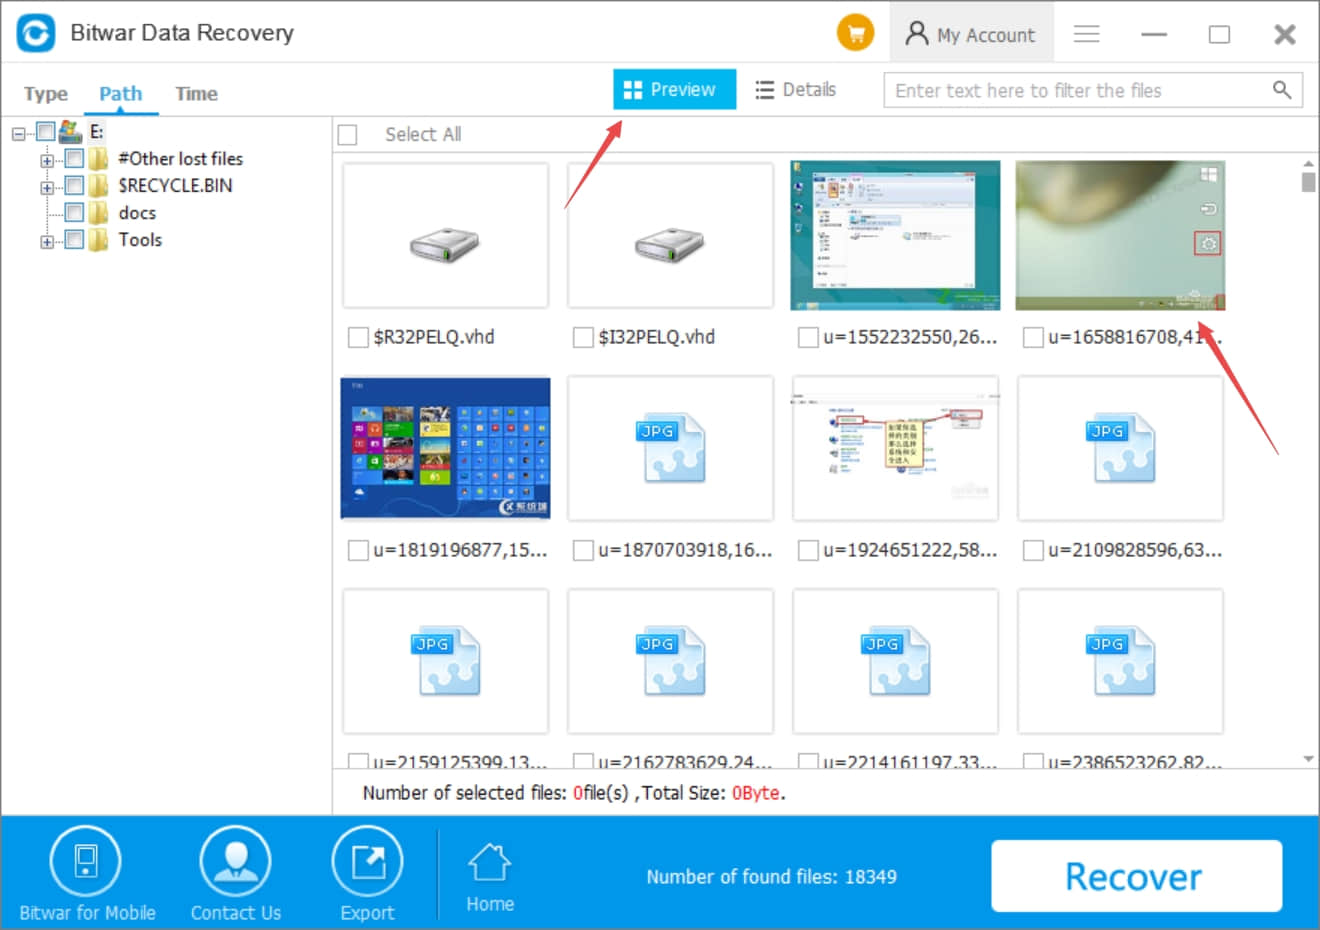 Preview-tab to preview -Bitwar Data Recovery